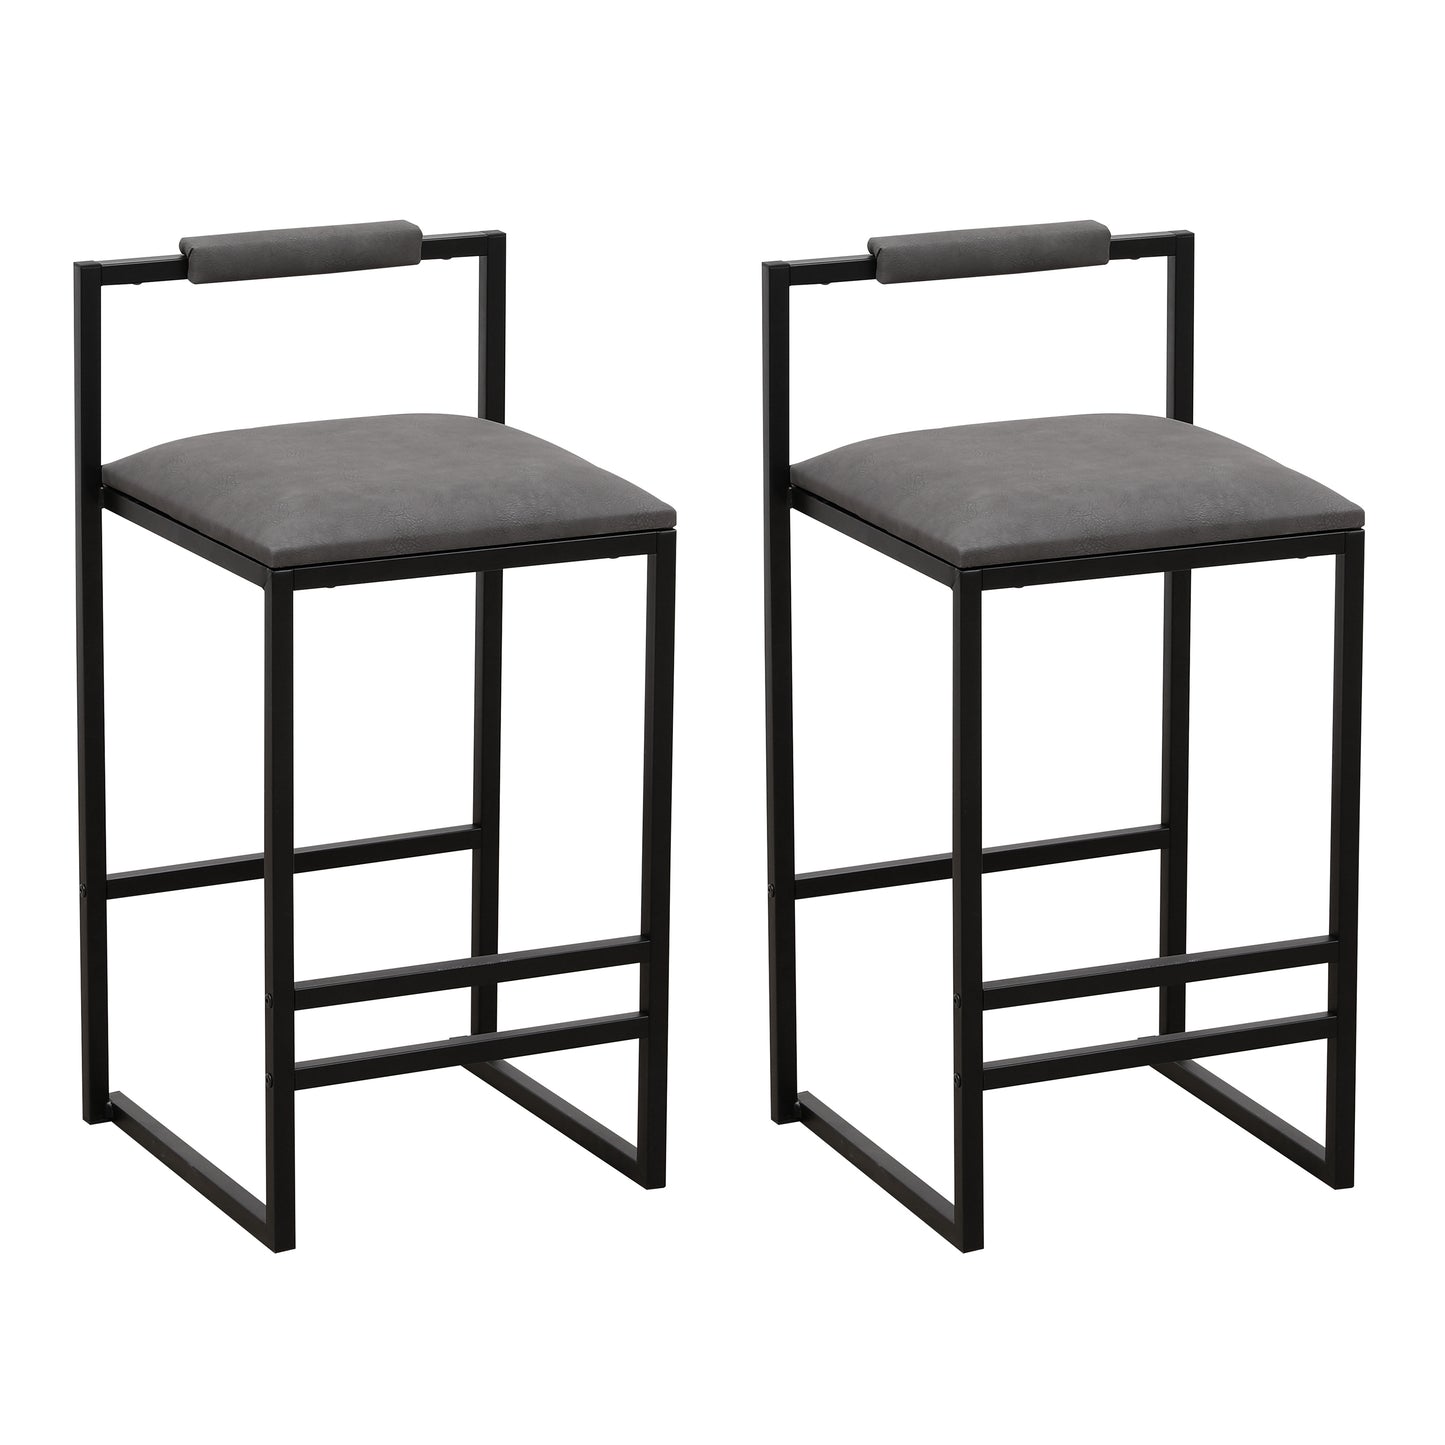 Set of 2 Counter Height Barstools Kitchen Island Stools with Back Modern Armless Metal Legs & PU Gray Upholstered Chairs (Gray with Back)